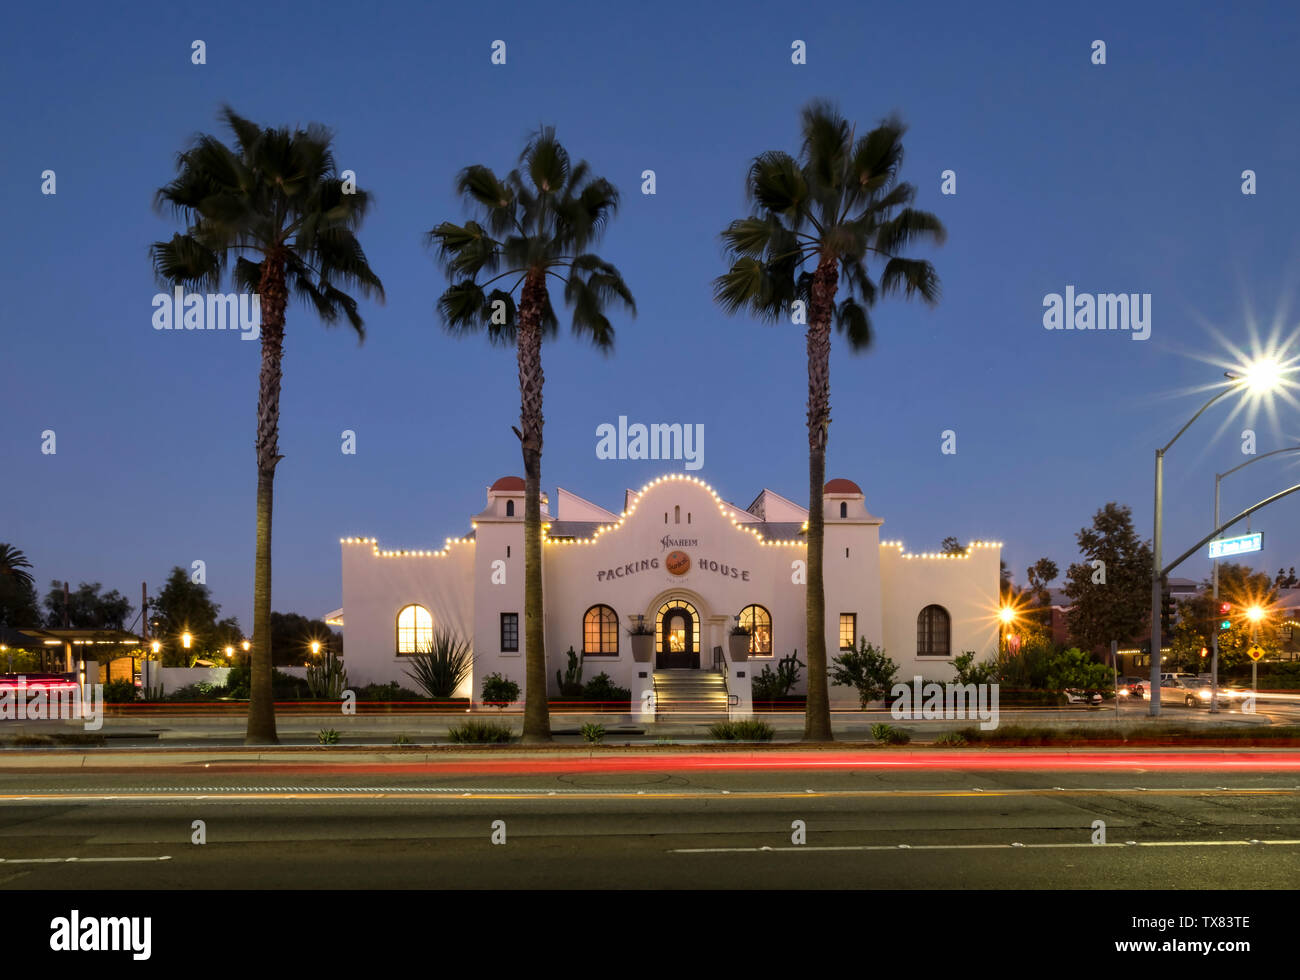 The Packing House at night, Anaheim, Los Angeles, California, USA Stock Photo